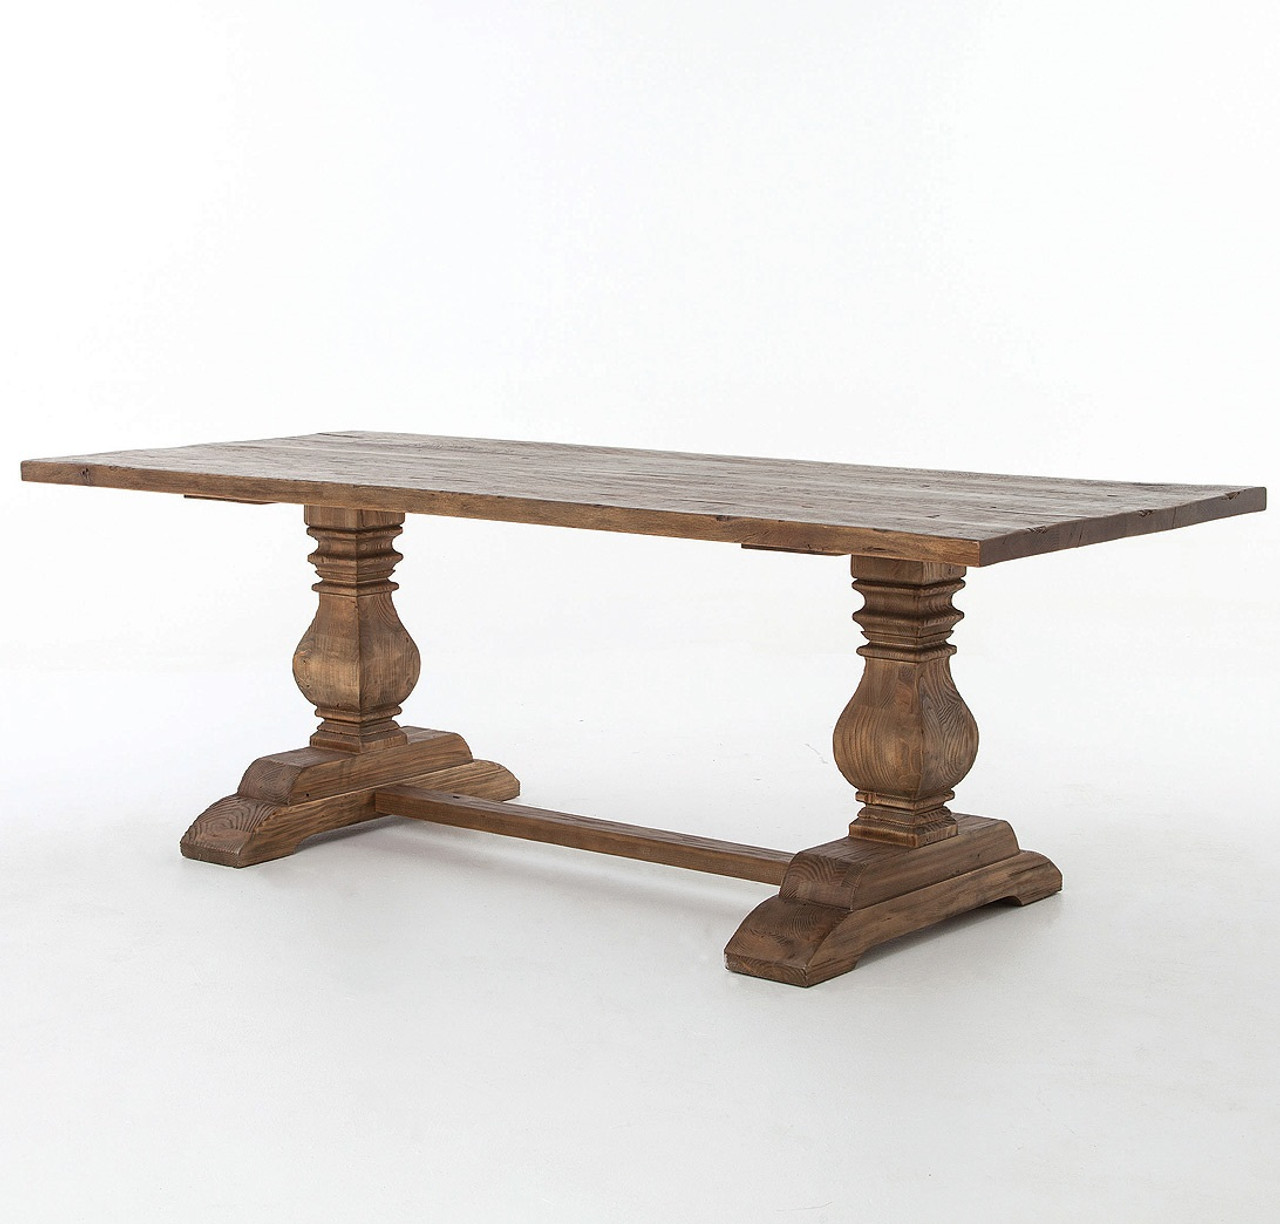 Natural Rustic Reclaimed Wood Trestle Dining Table 87" | Zin Home